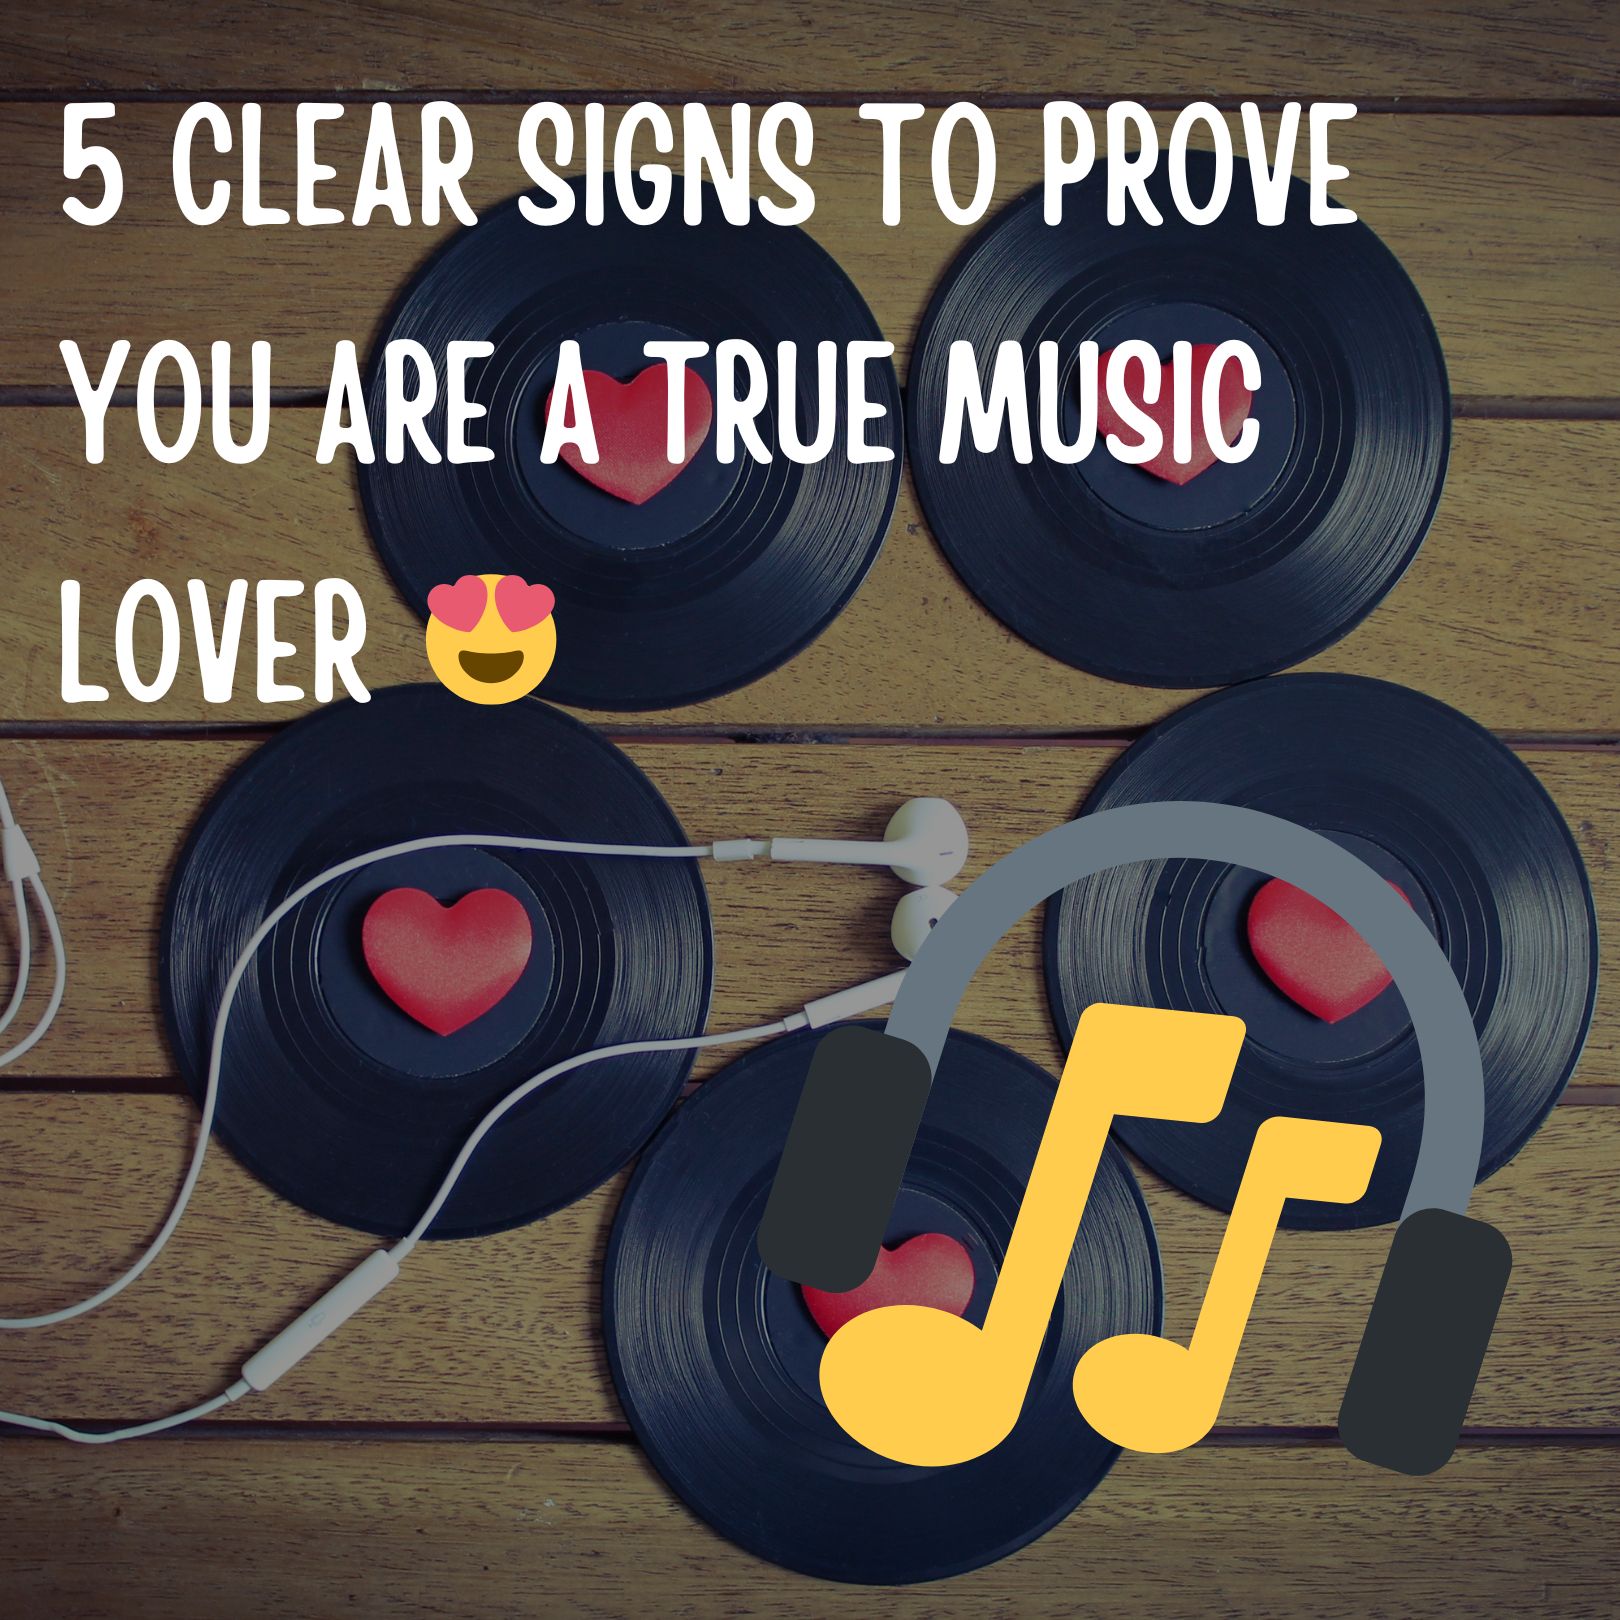 Are you a music lover who can't play songs? It can always be an